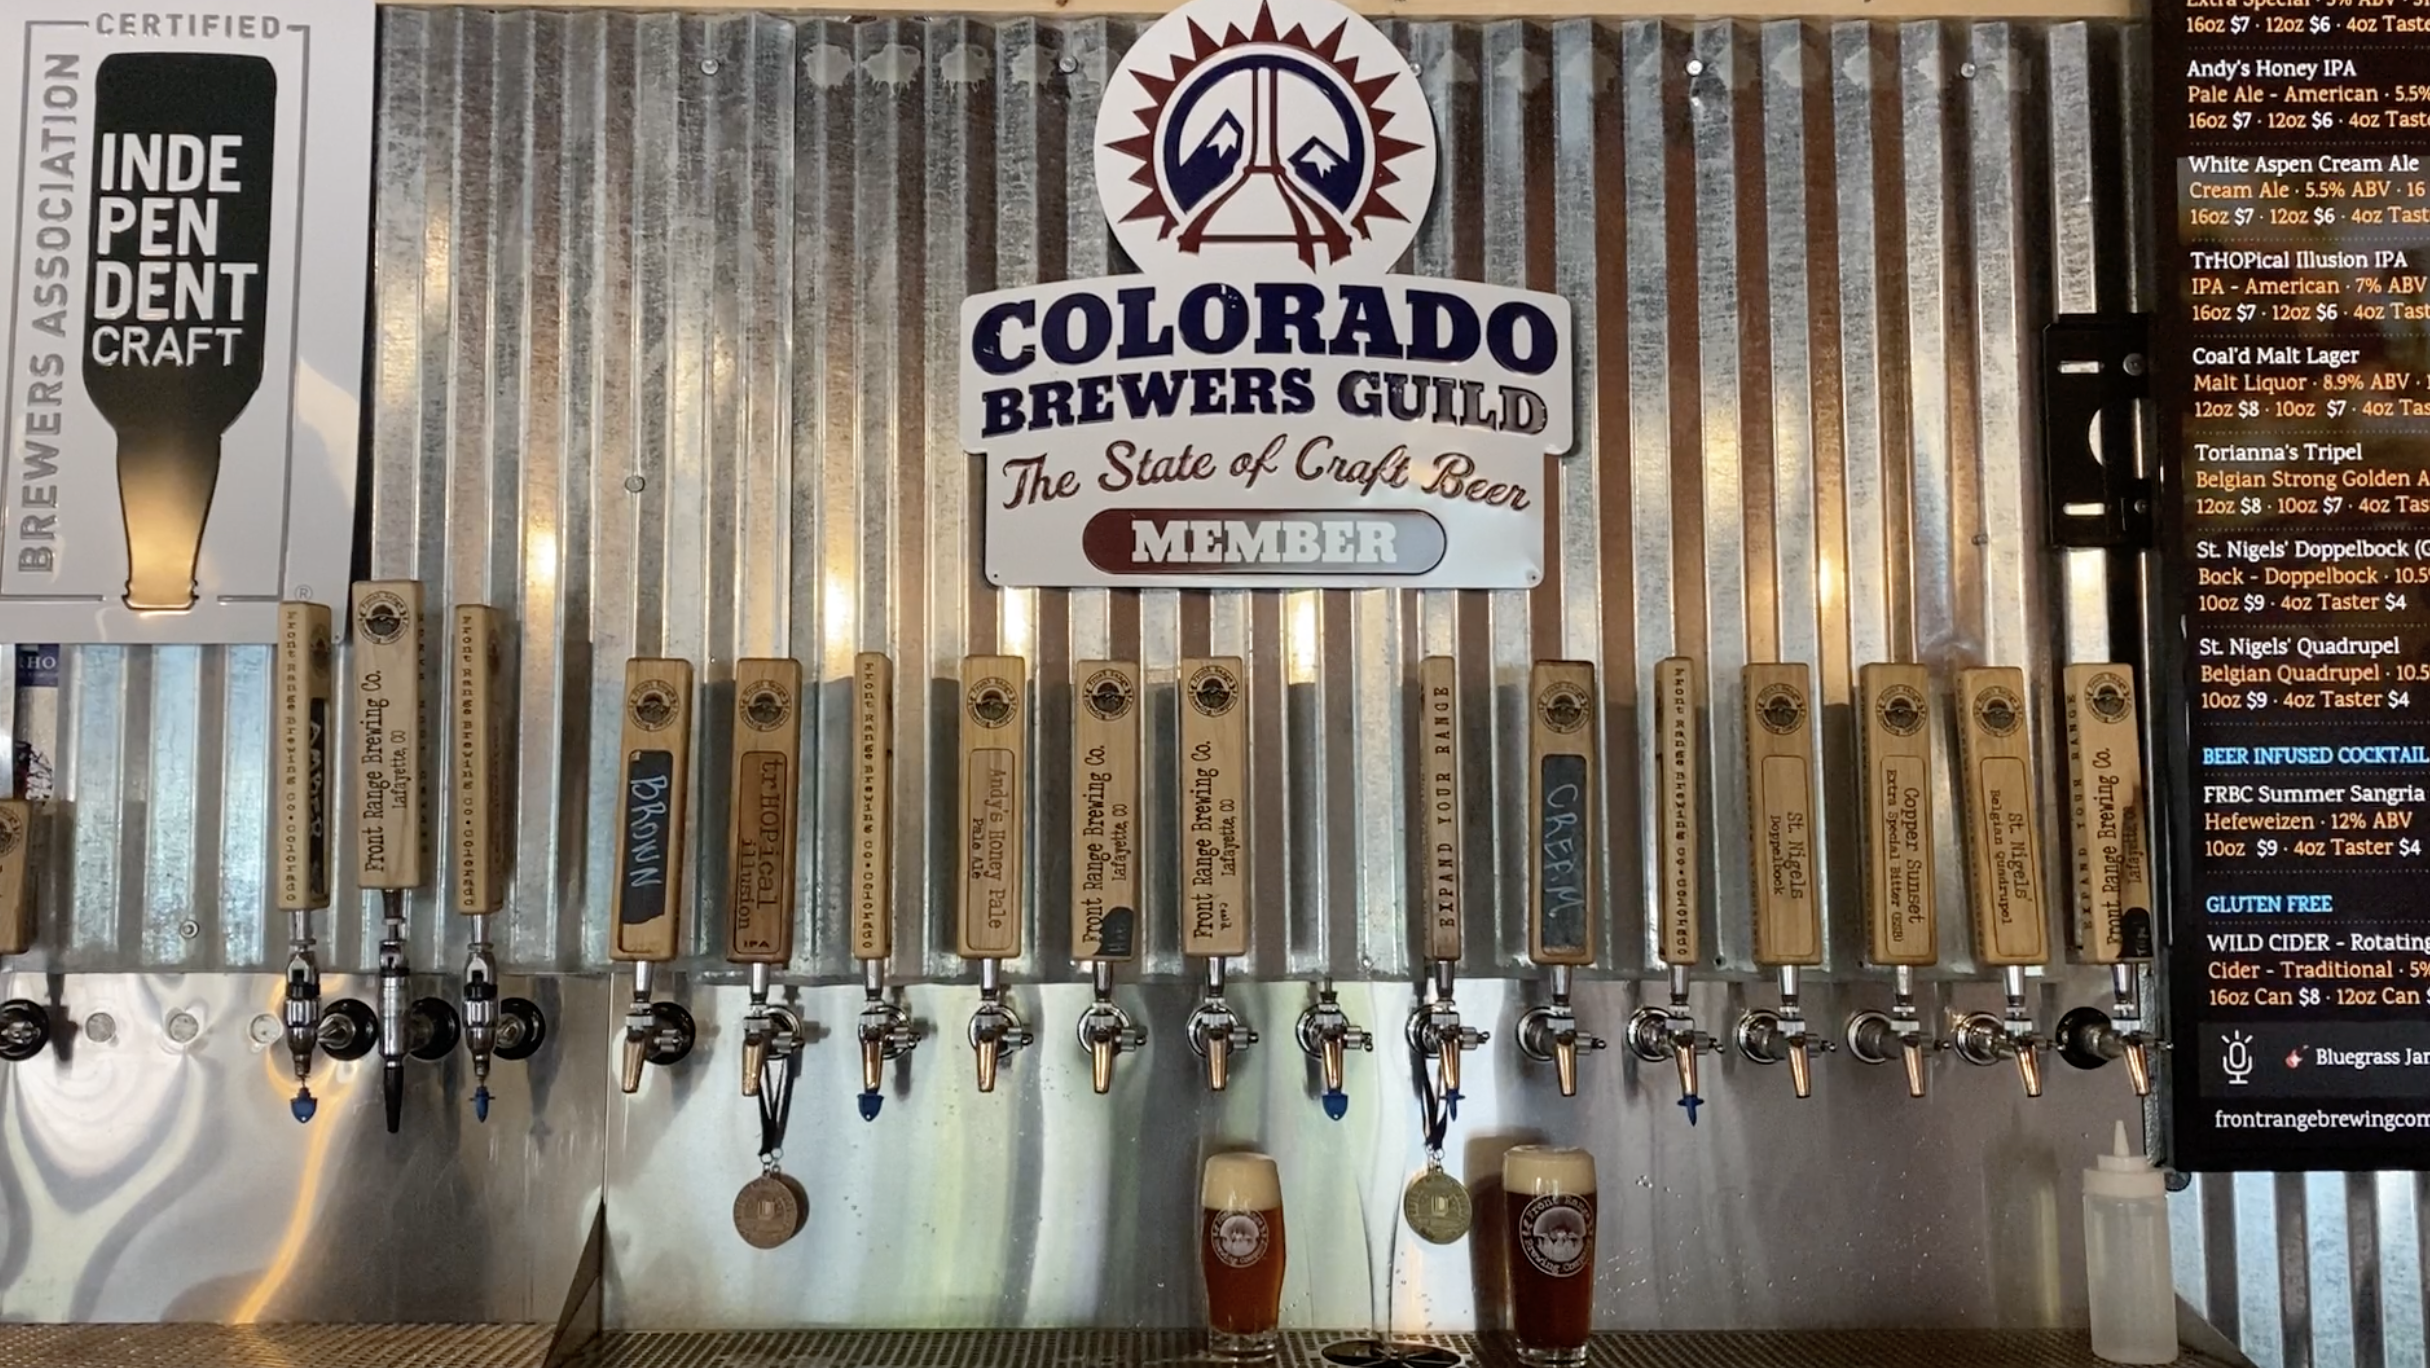 Lafayette Colorado Brewery: This is a photo of a bar with several beer taps on the silver wall of corrugated metal. Above the taps is a sign that says "Colorado Brewer's Guild."